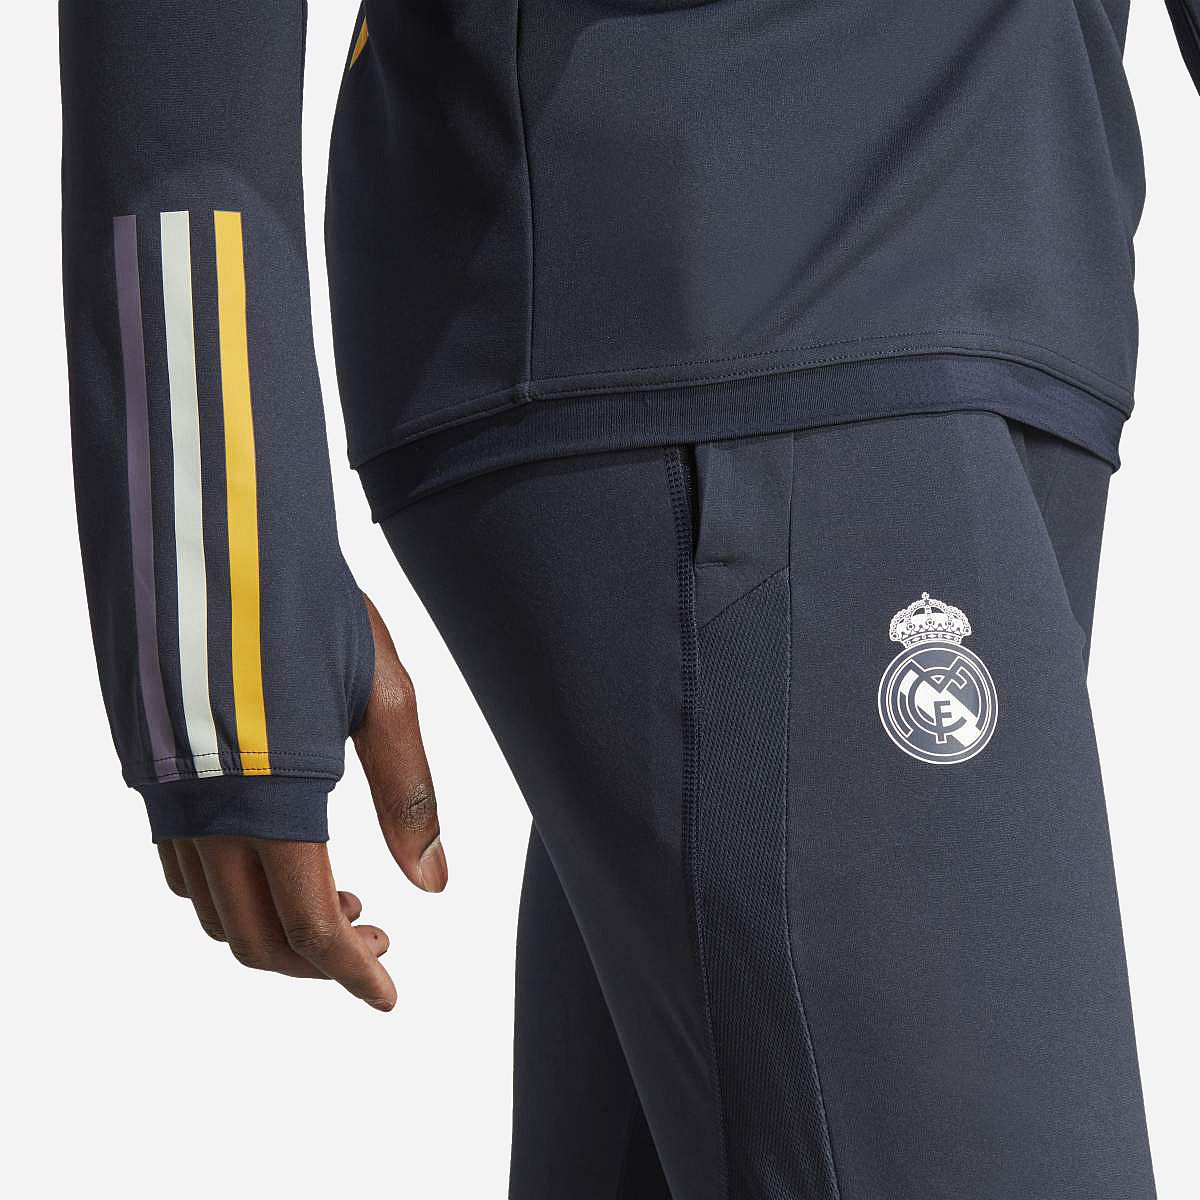 AN299586 Real Madrid Training Pant